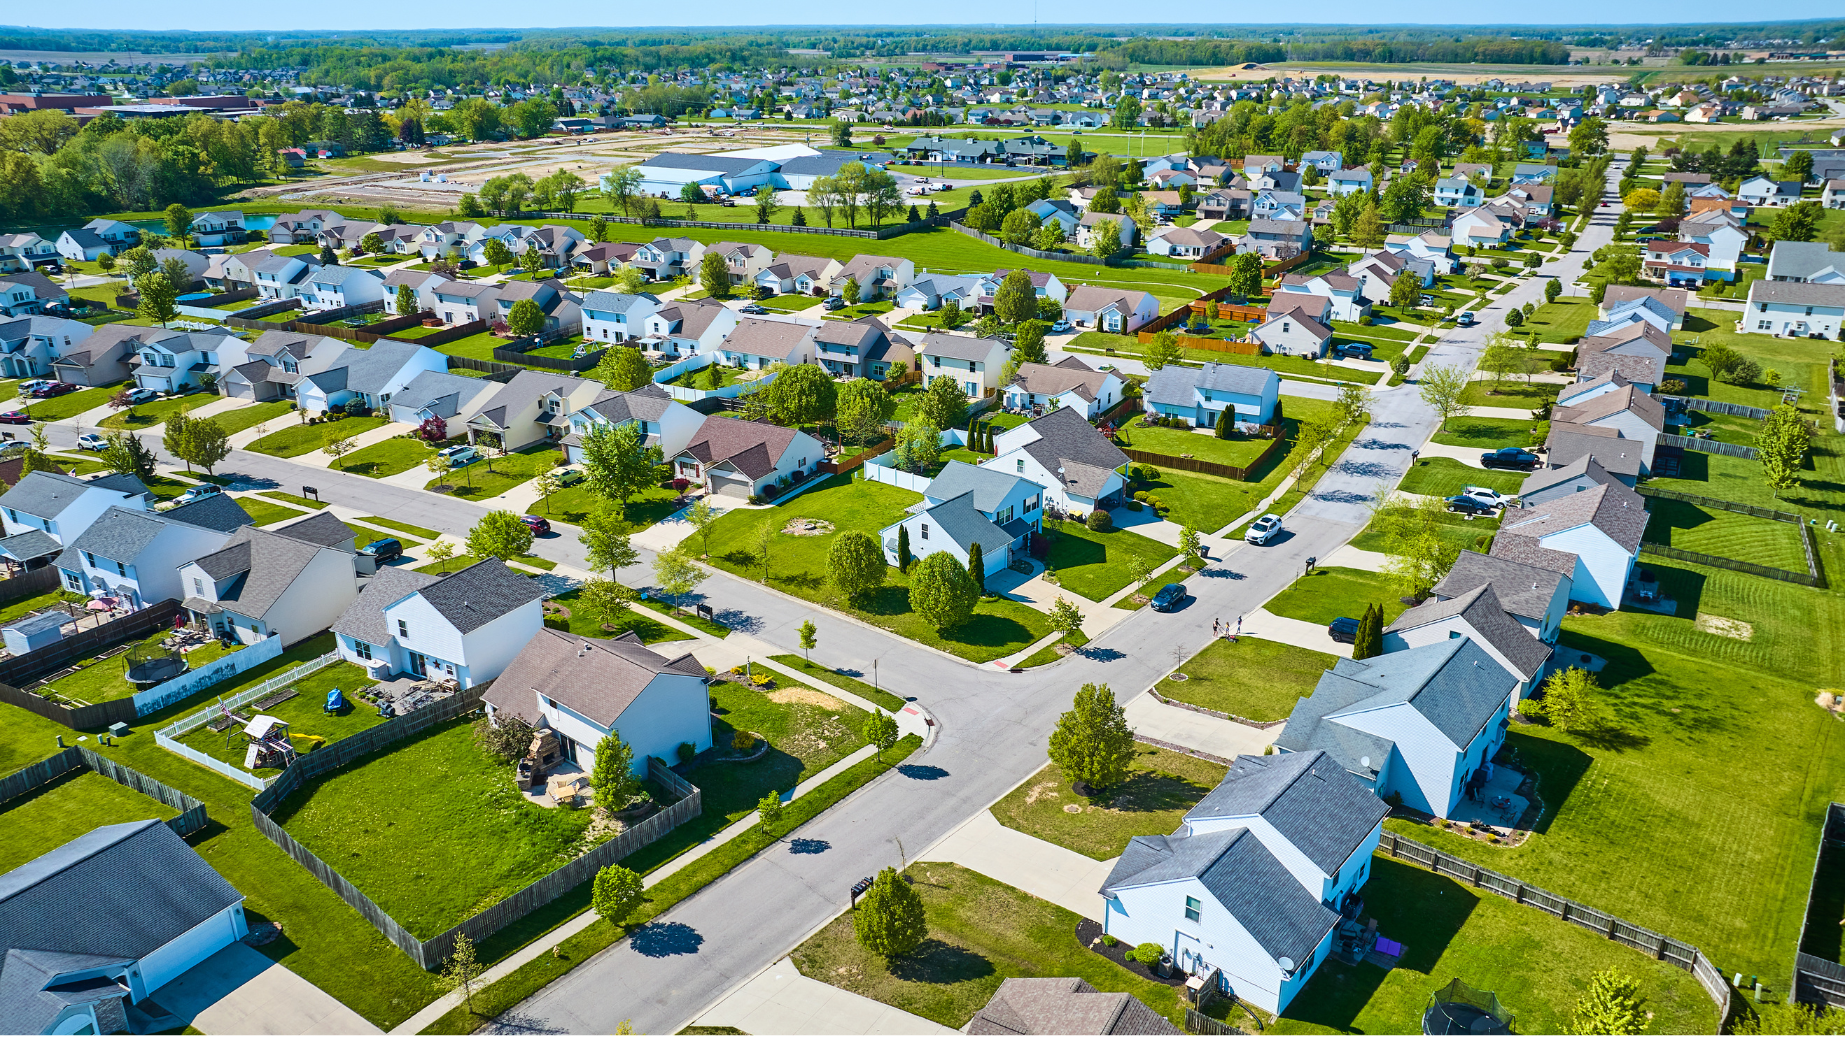 Aerial view of the residential homes during a vibrant sunny summer day